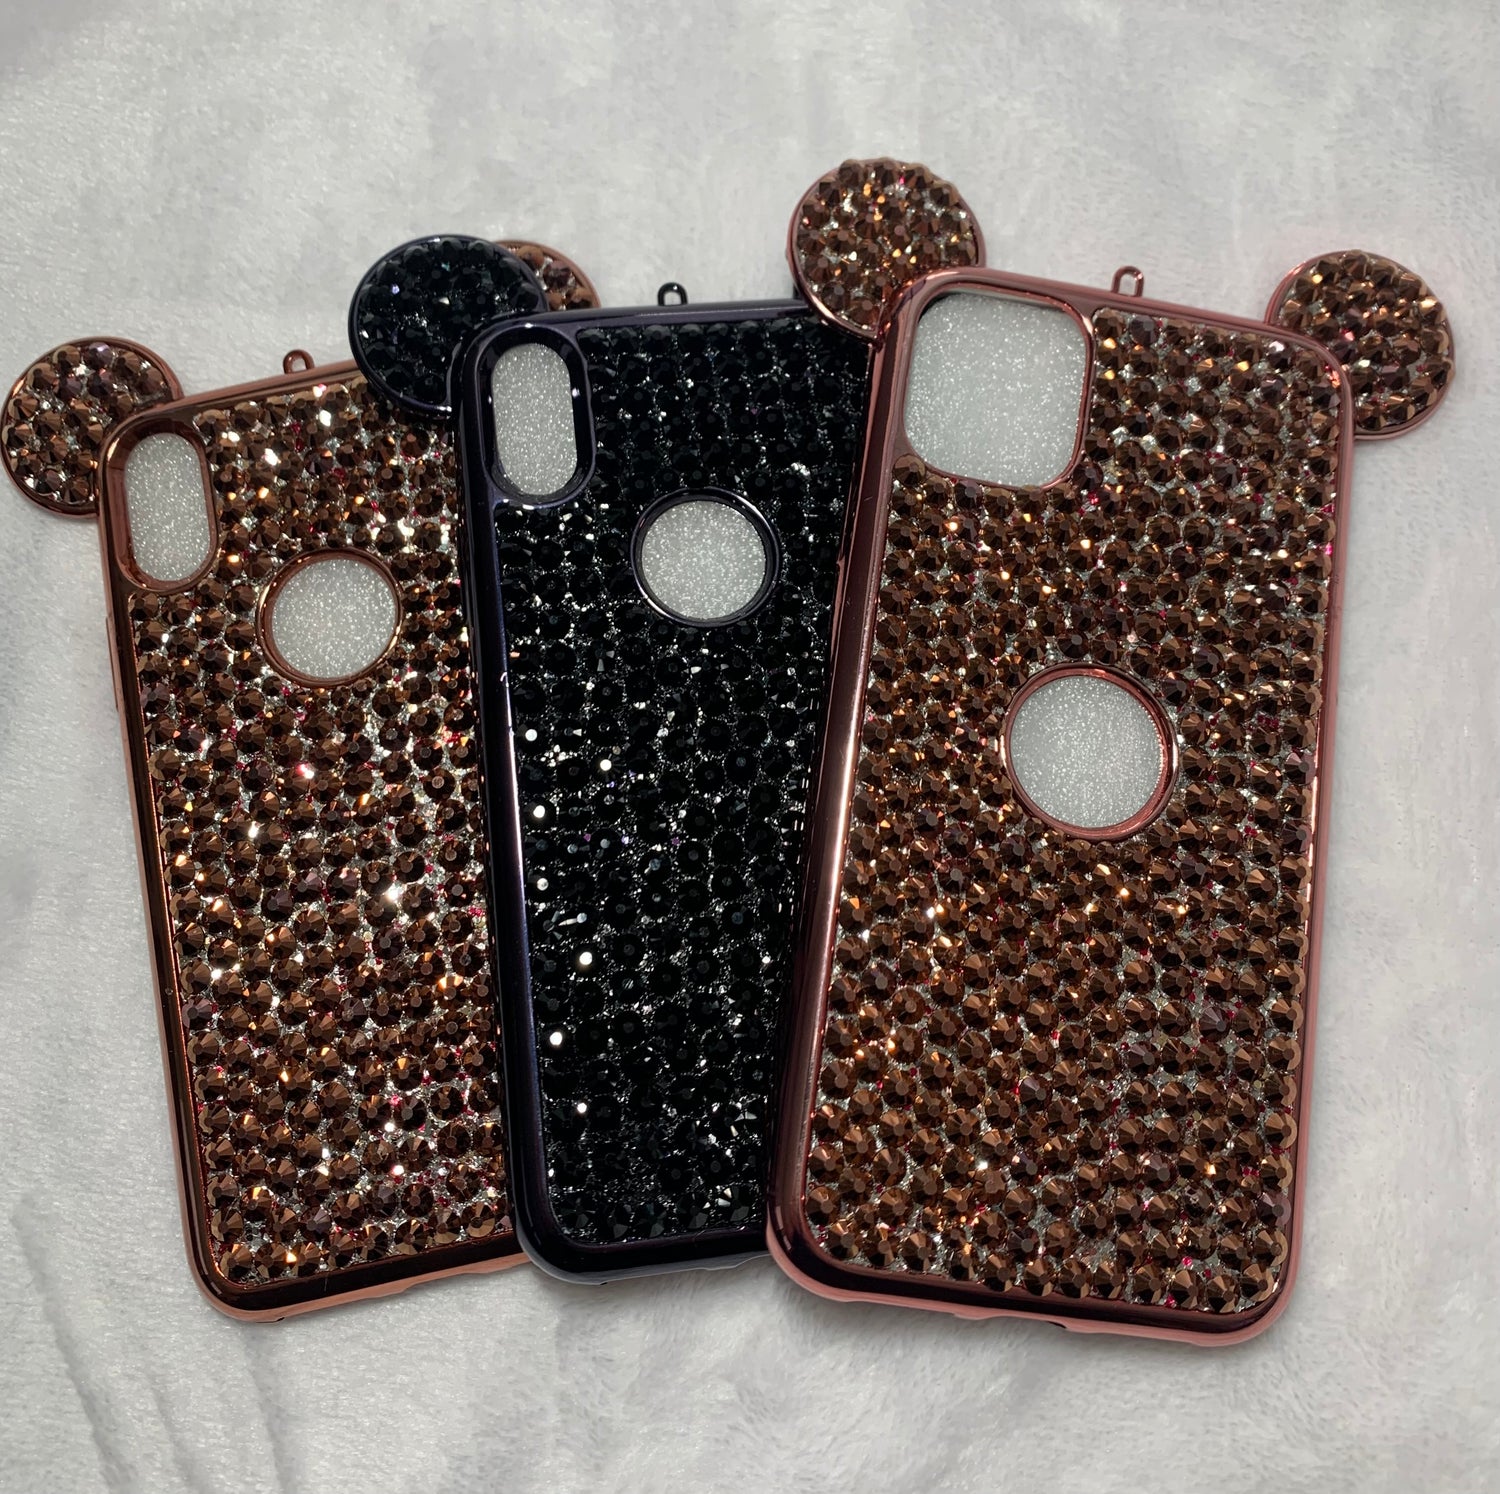 iPhone Cell Phone Cases